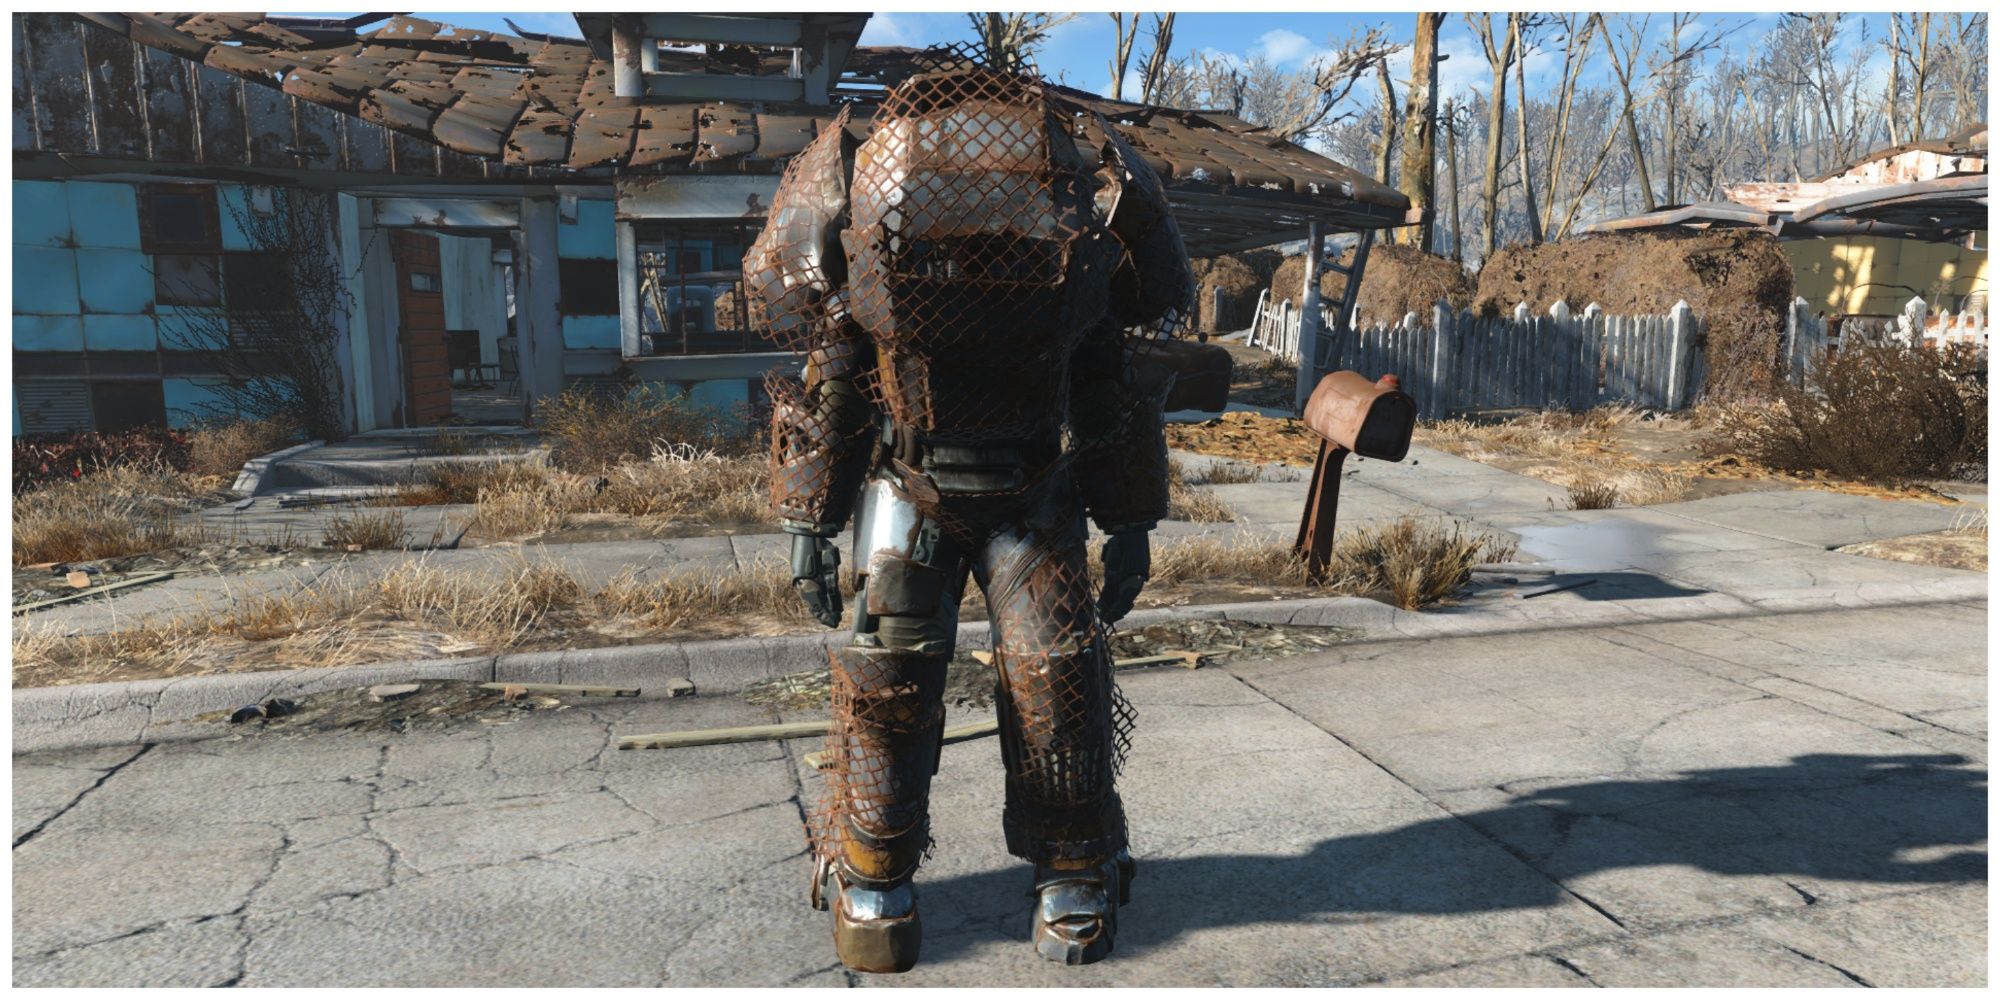 Overboss Power Armor from Fallout 4